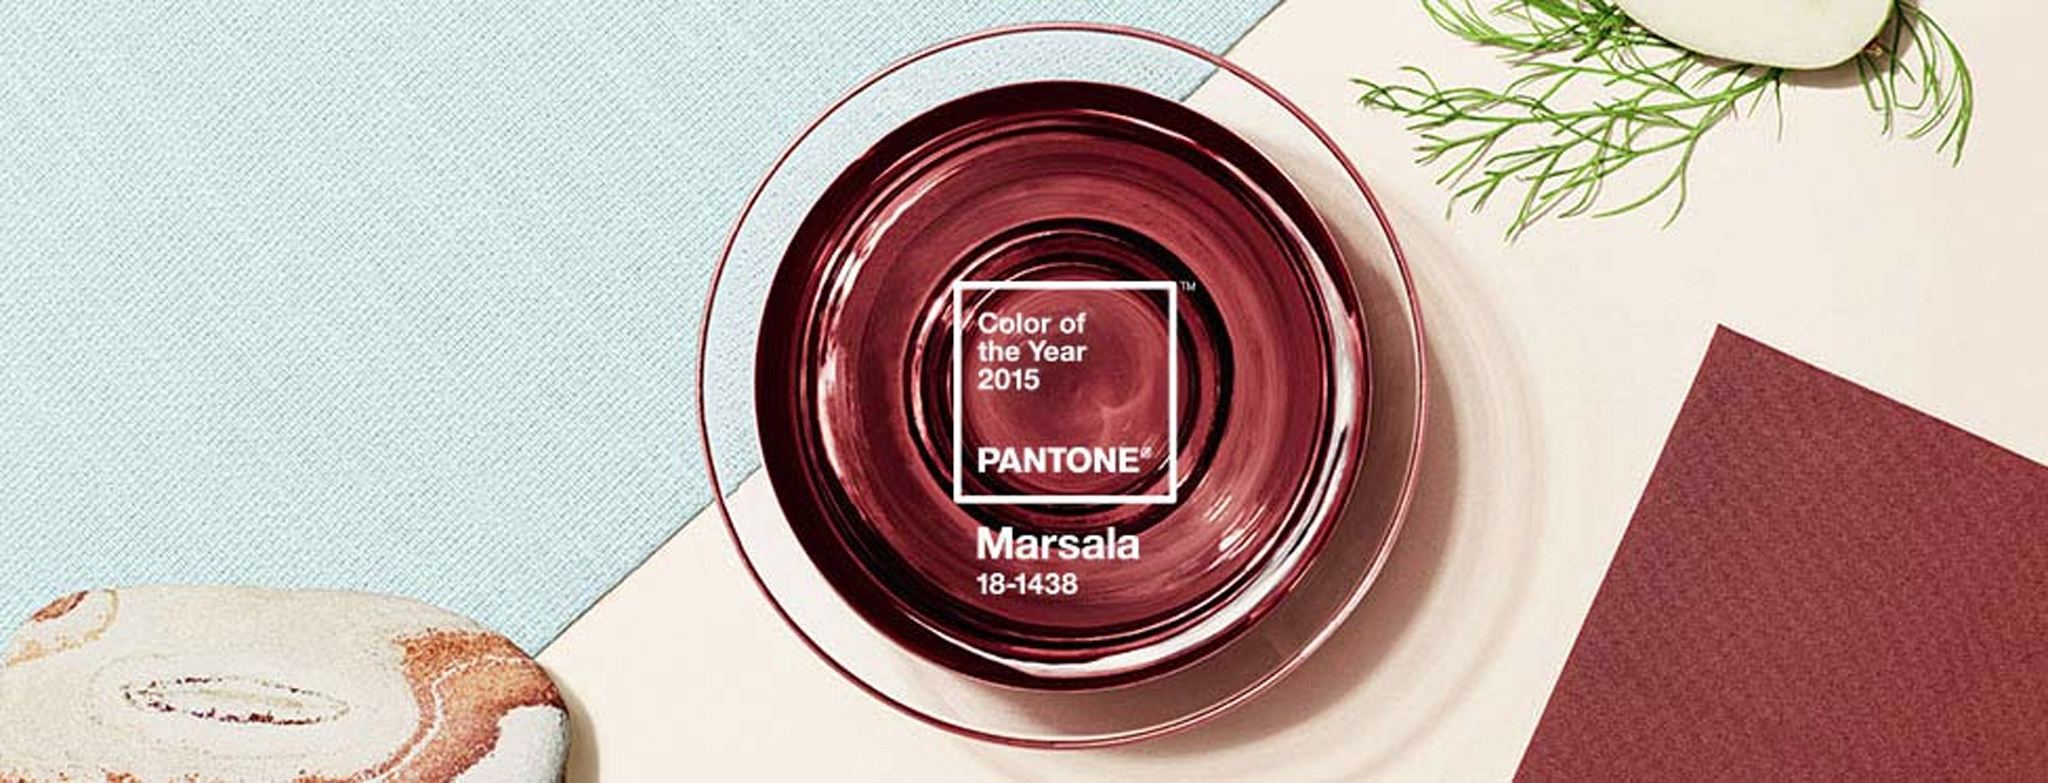 Pantone Marsala Color of the Year 2015